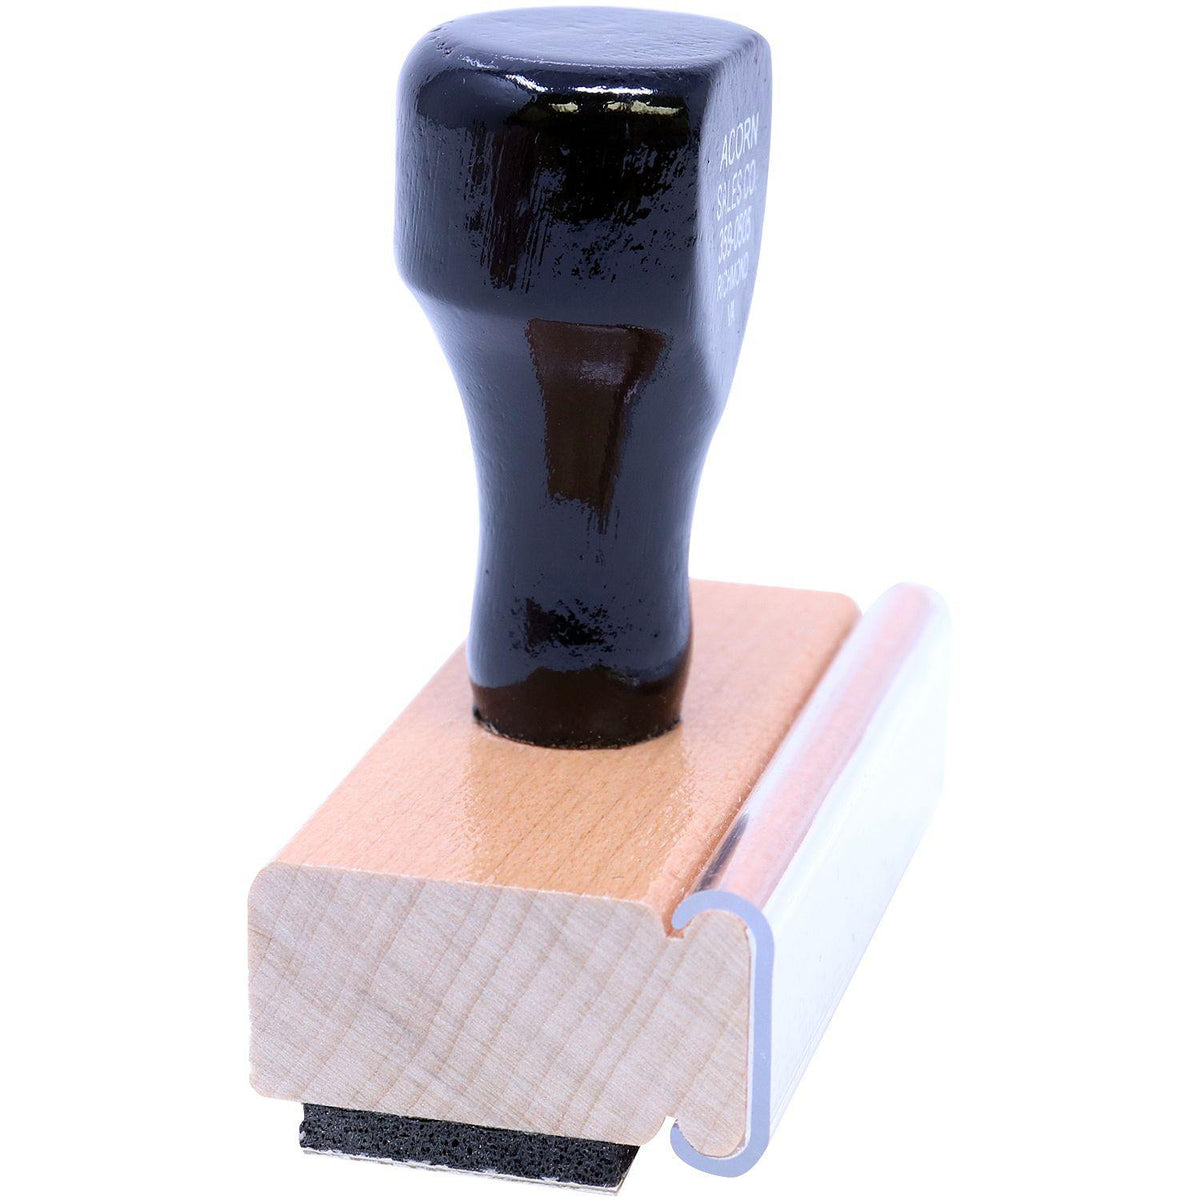 Side View of E-mailed with Date Box Rubber Stamp at an Angle